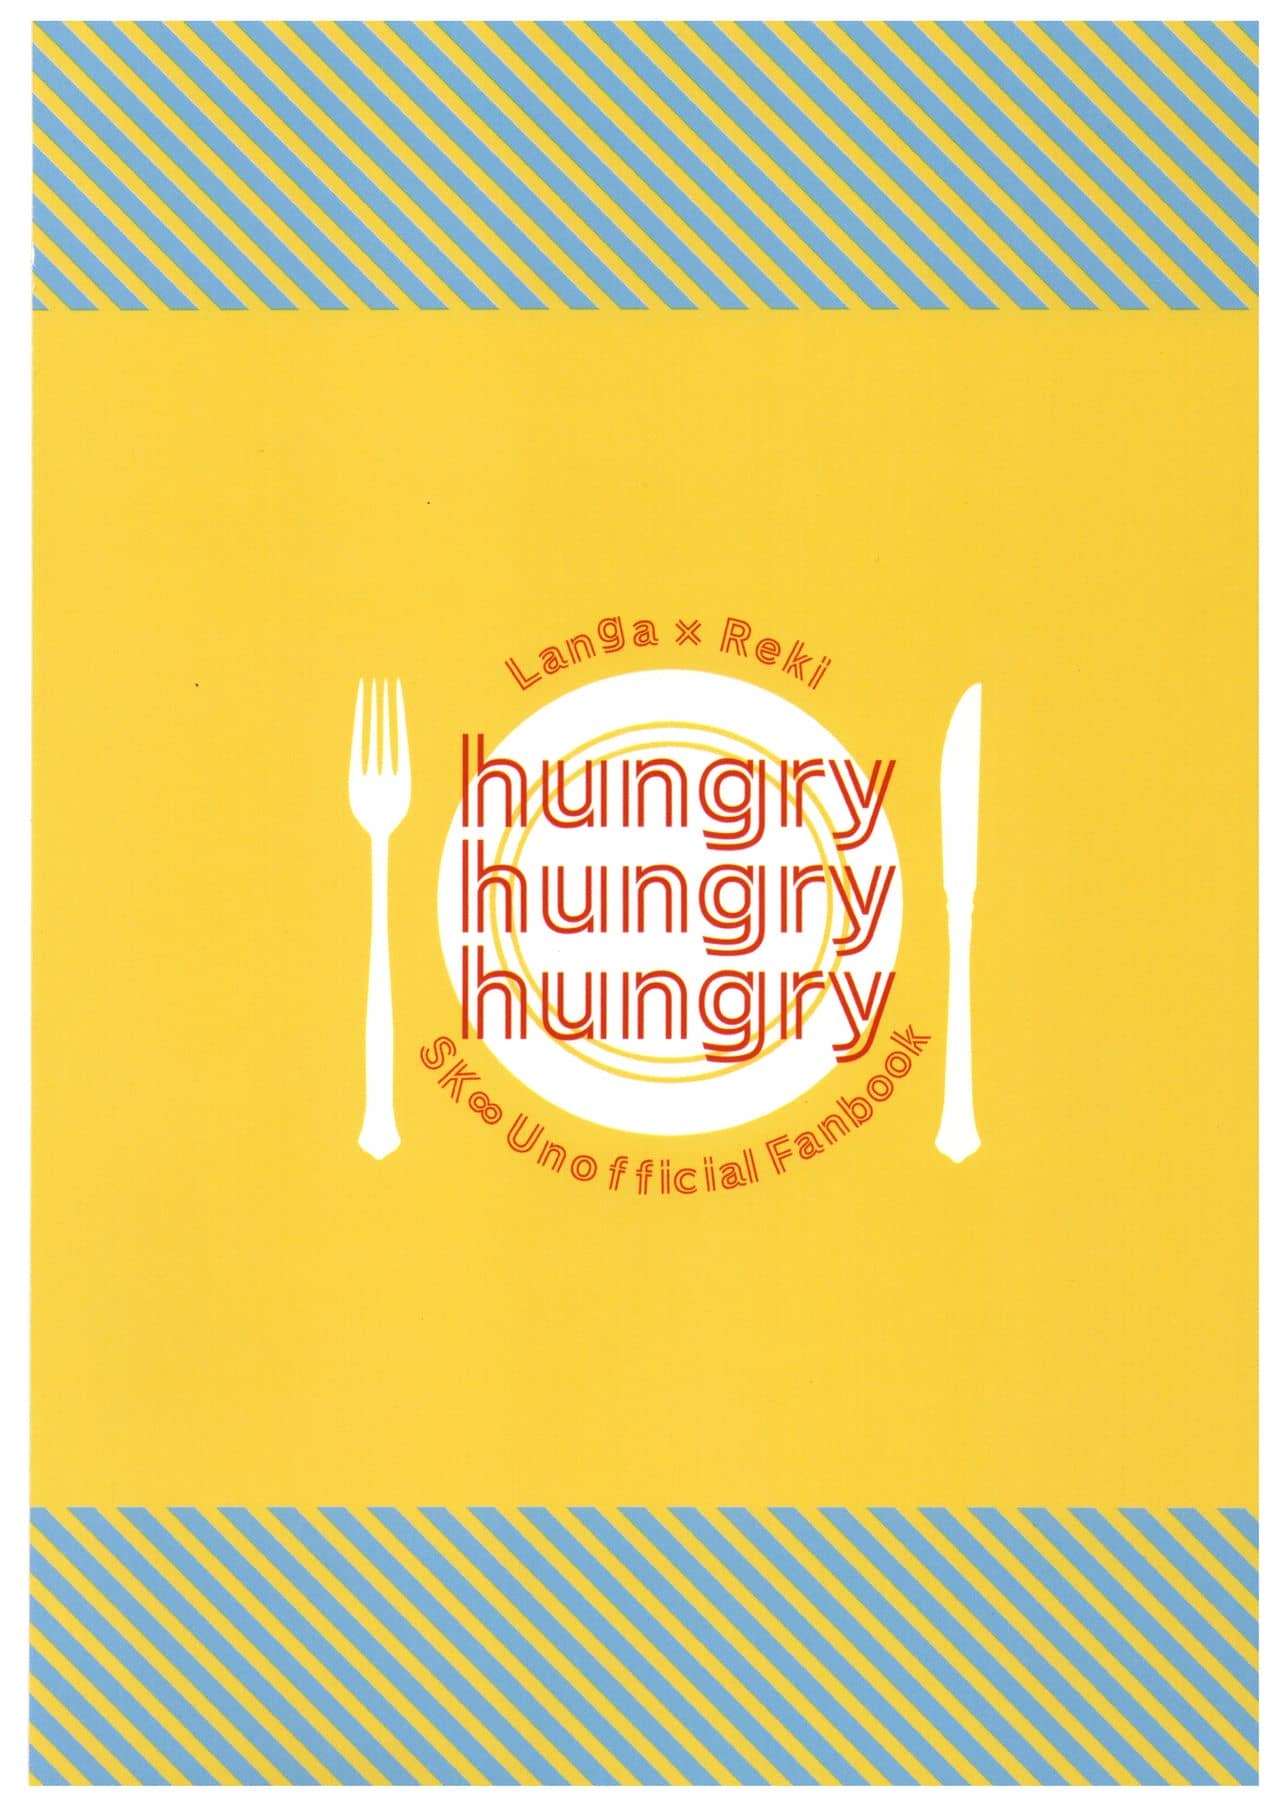 Hungry hungry hungry